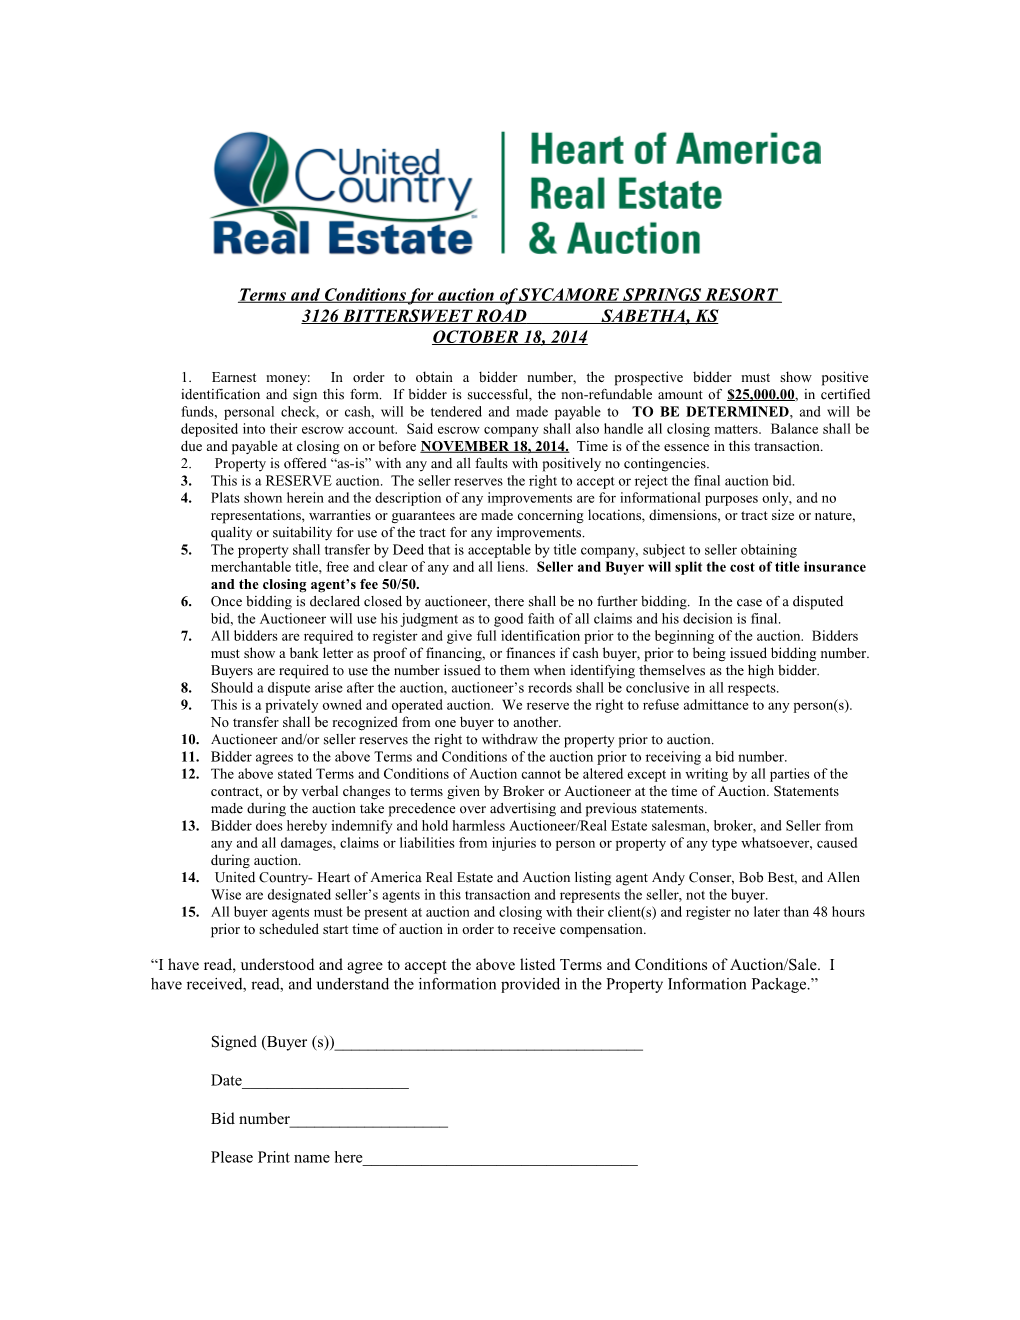 Terms and Conditions for Real Estate Auction